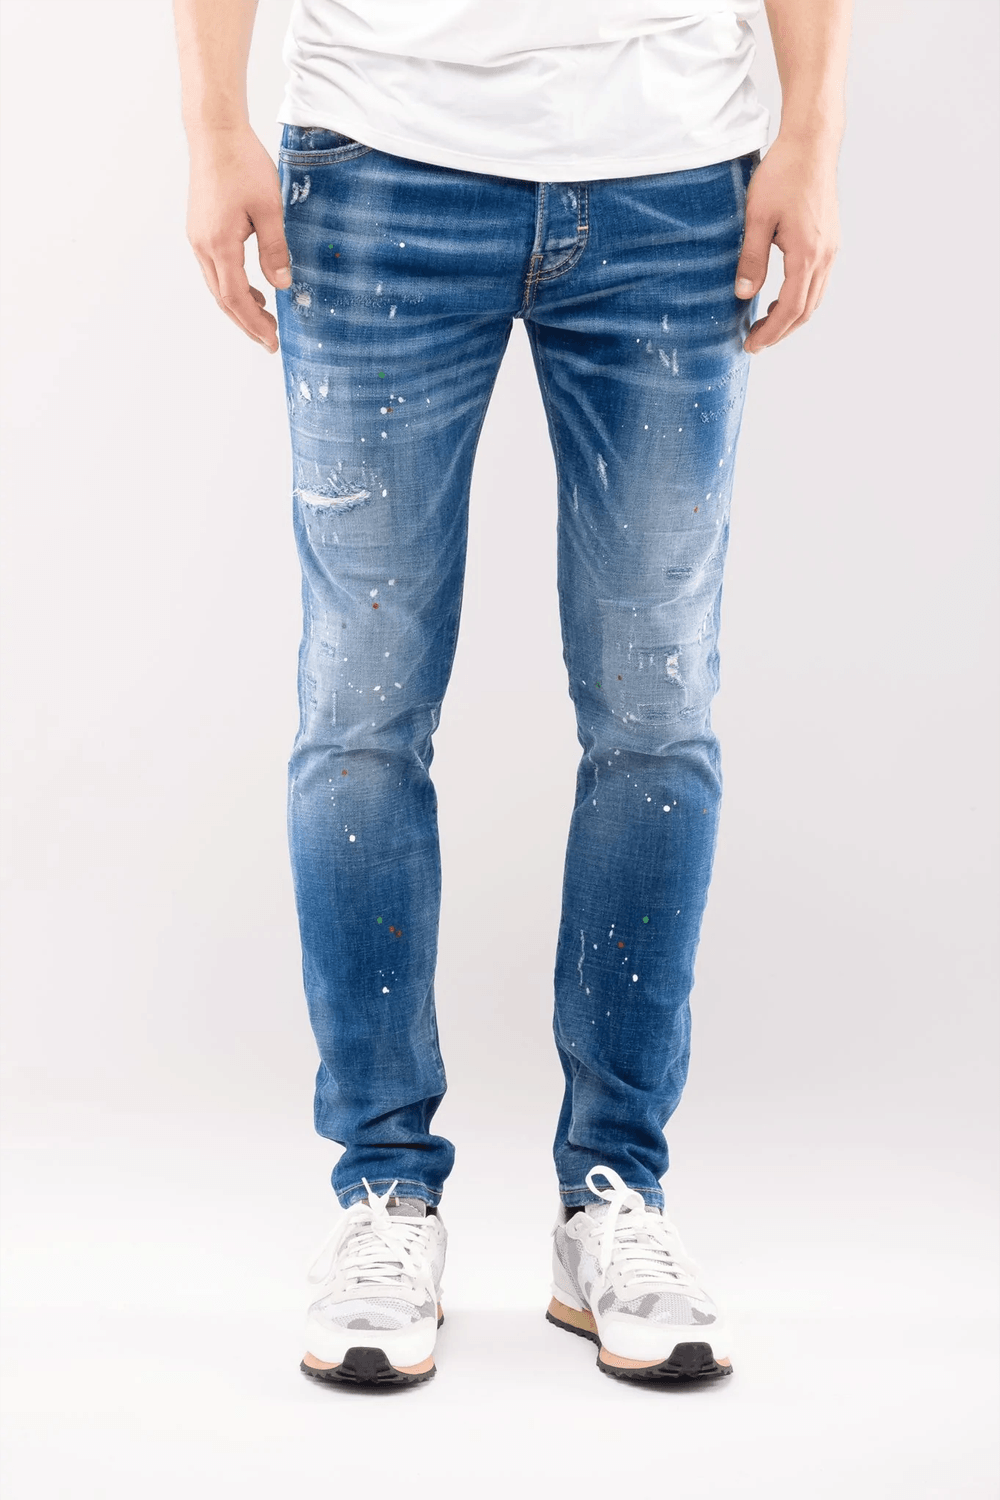 Buy the 7TH HVN S-2493 Jean in Blue at Intro. Spend £50 for free UK delivery. Official stockists. We ship worldwide.